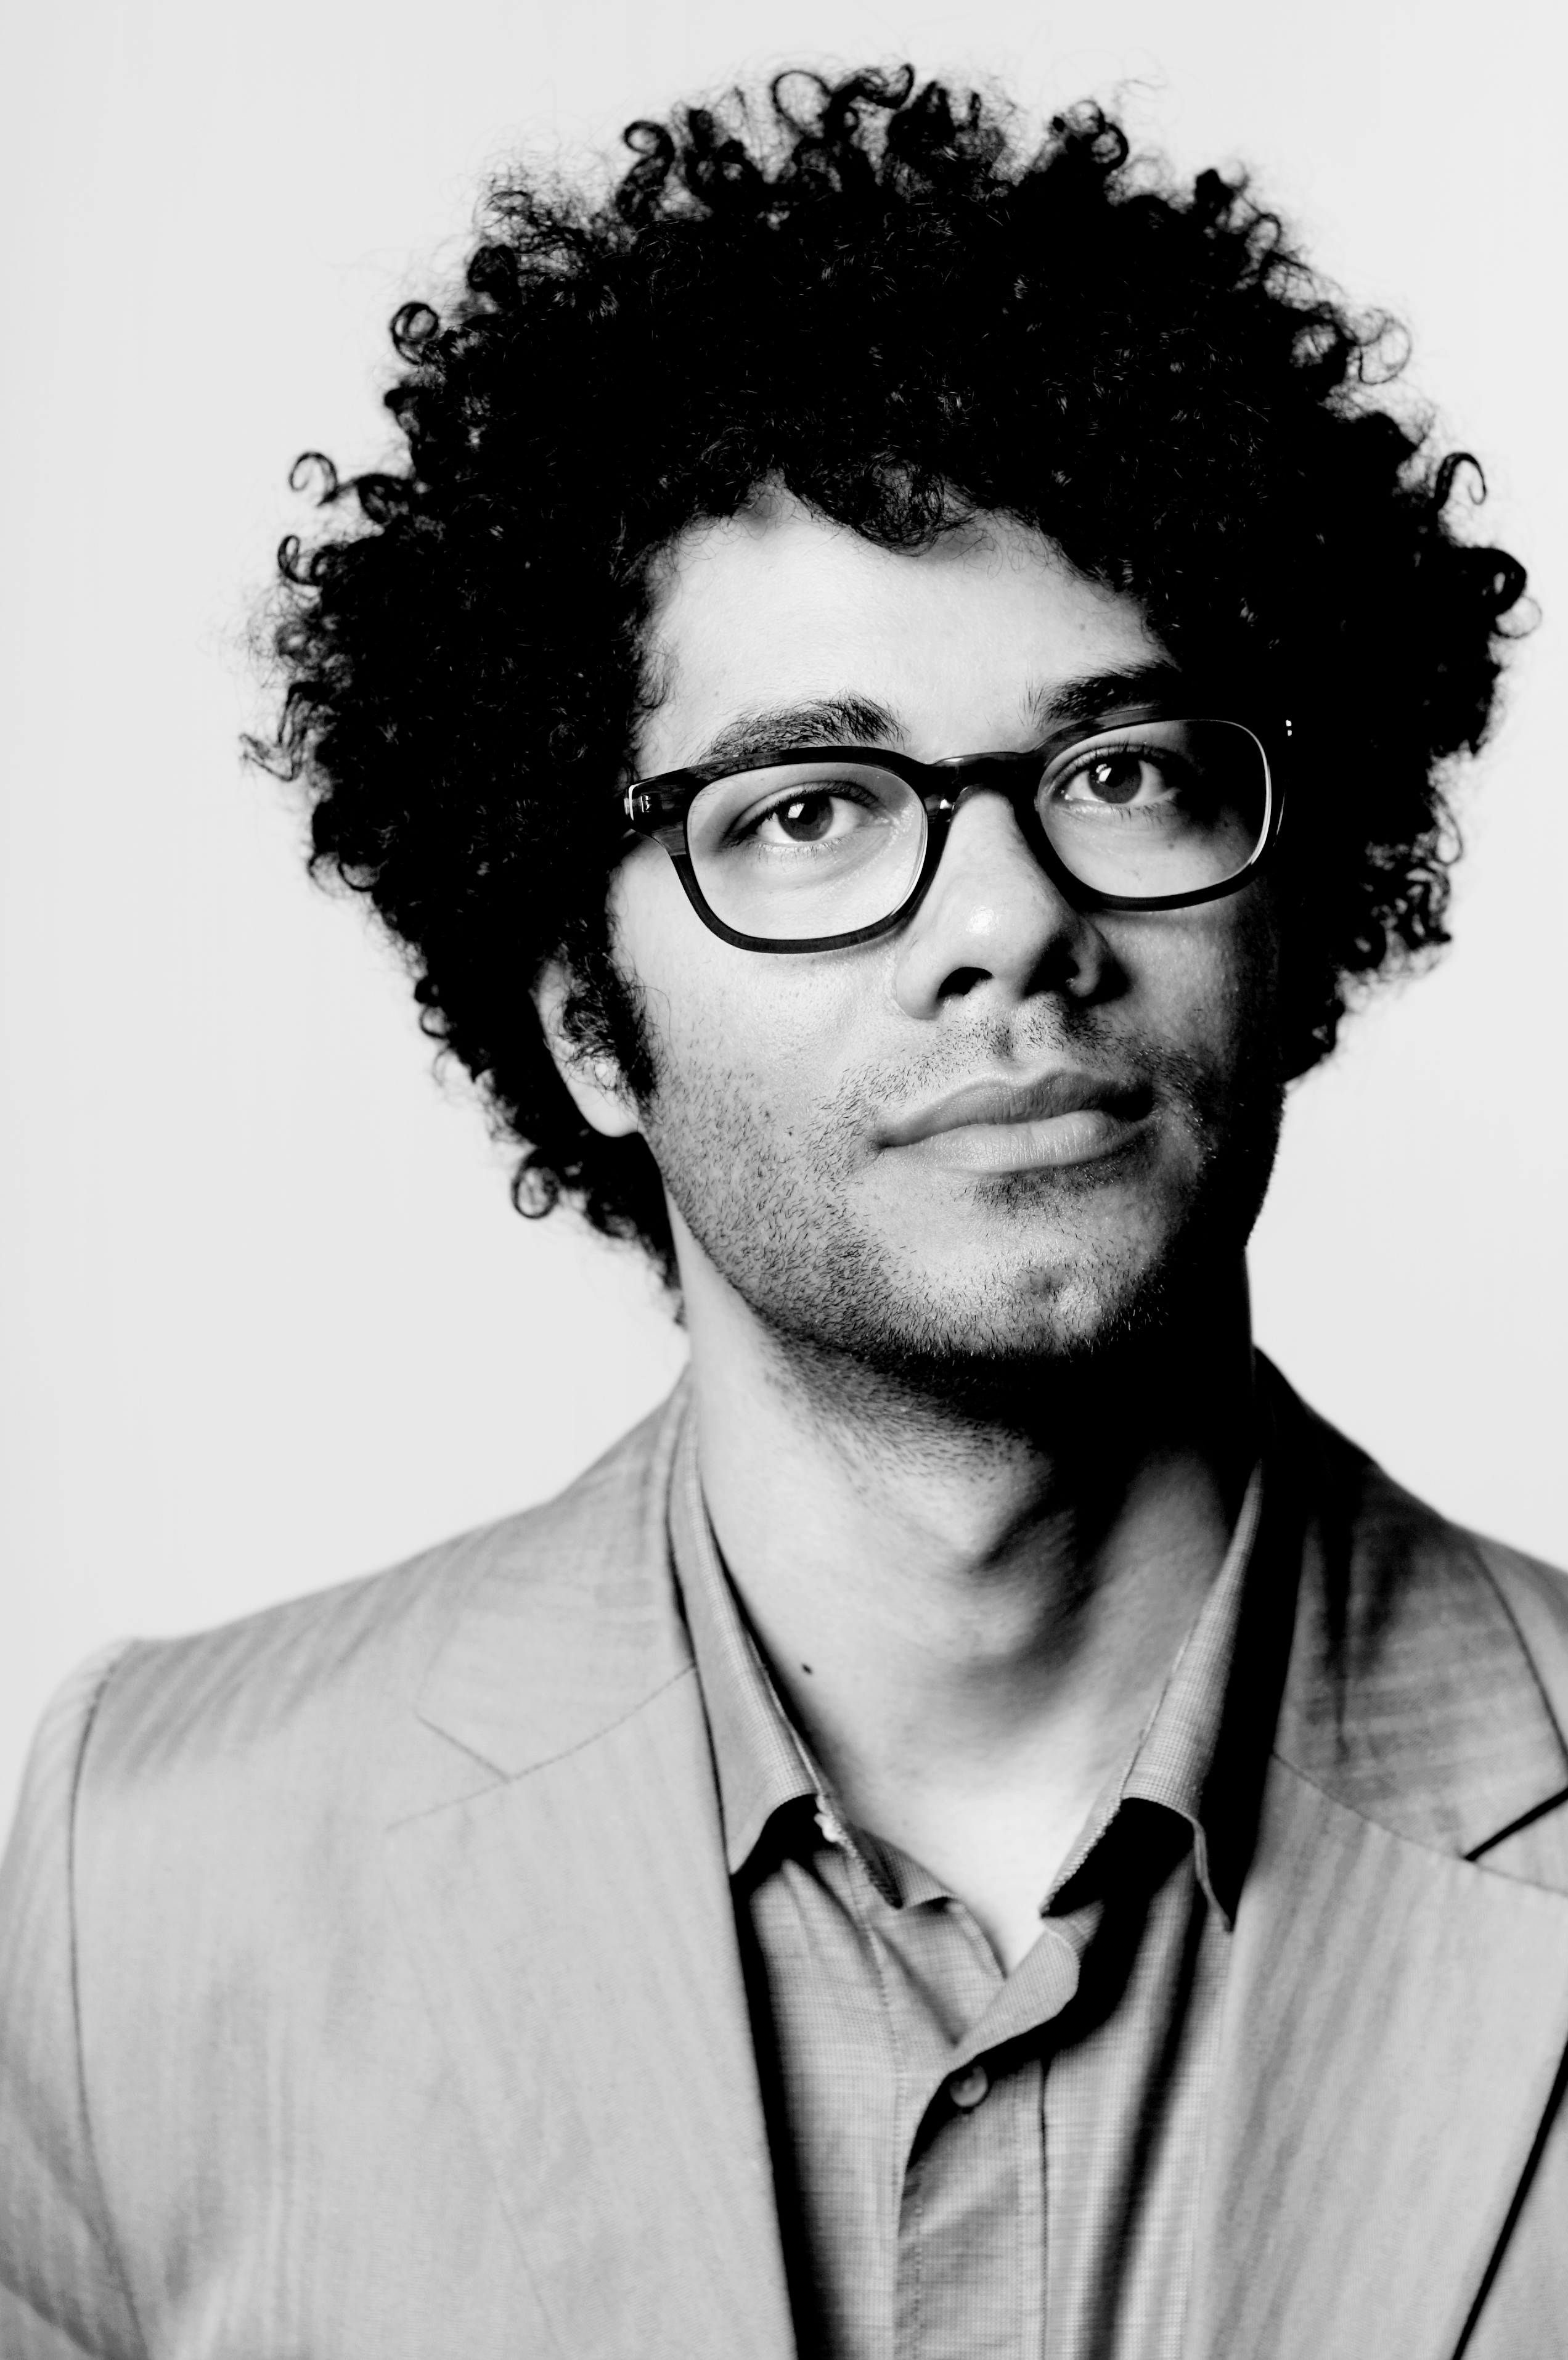 The 45-year old son of father Dagny Baassuik Ayoade and mother Layide Ade Laditi Ayoade Richard Ayoade in 2022 photo. Richard Ayoade earned a  million dollar salary - leaving the net worth at  million in 2022